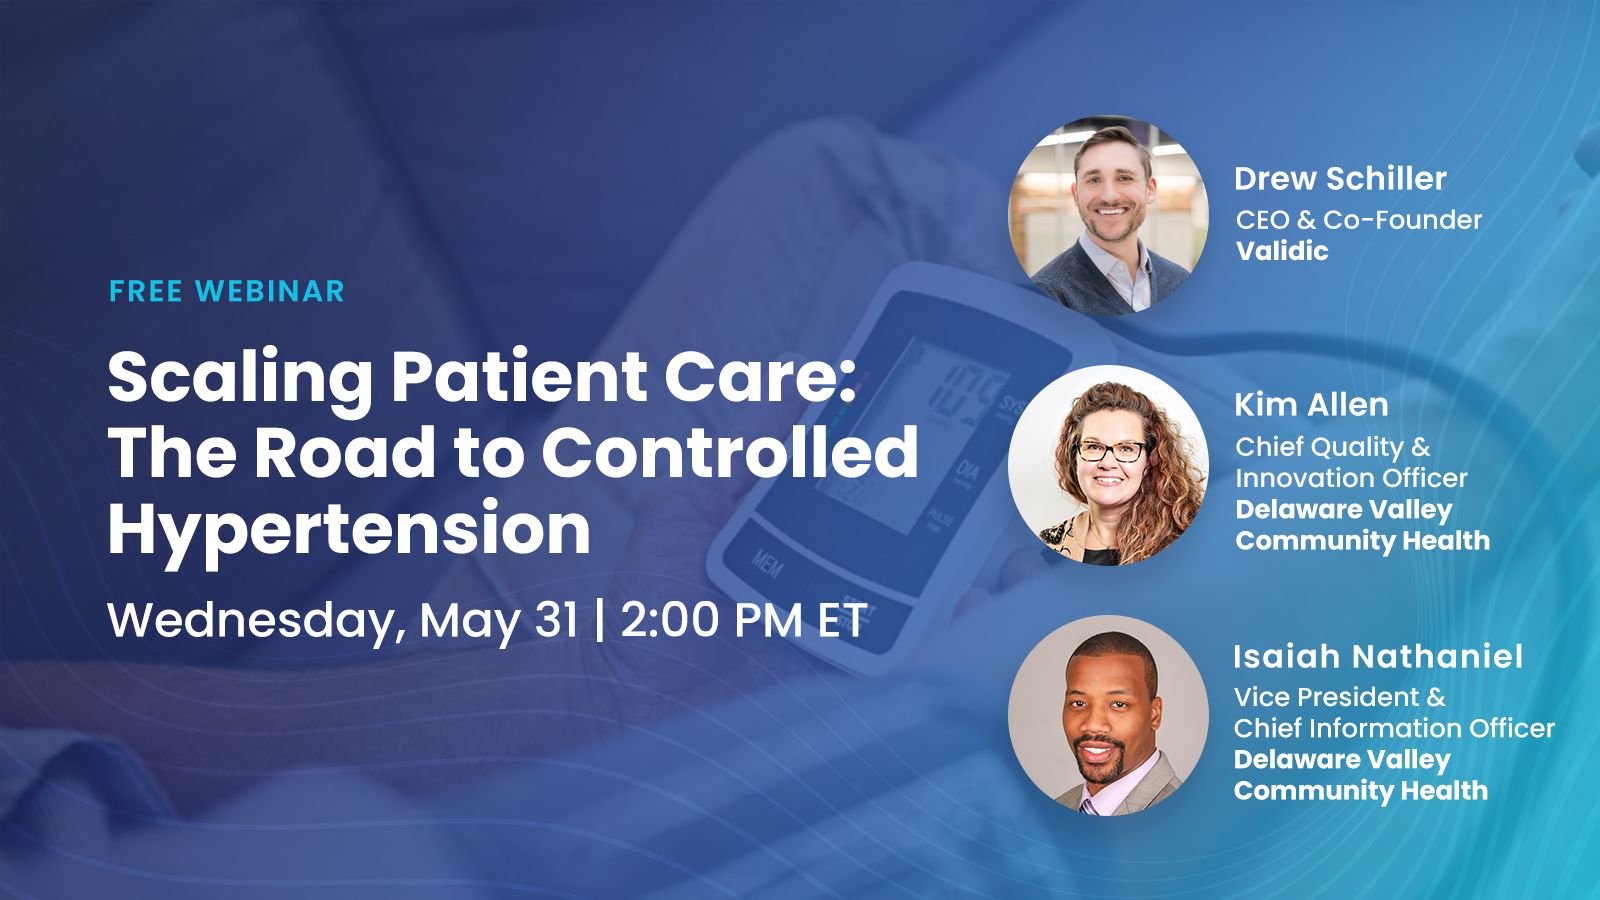 Scaling patient care: the road to controlled hypertension. Wednesday May 31 2:00pm ET. Drew Schiller, CEO Validic. Kim Allen, Chief Quality & Innovation Officer, Isaiah Nathaniel. VP & CIO, DE Valley Community Health